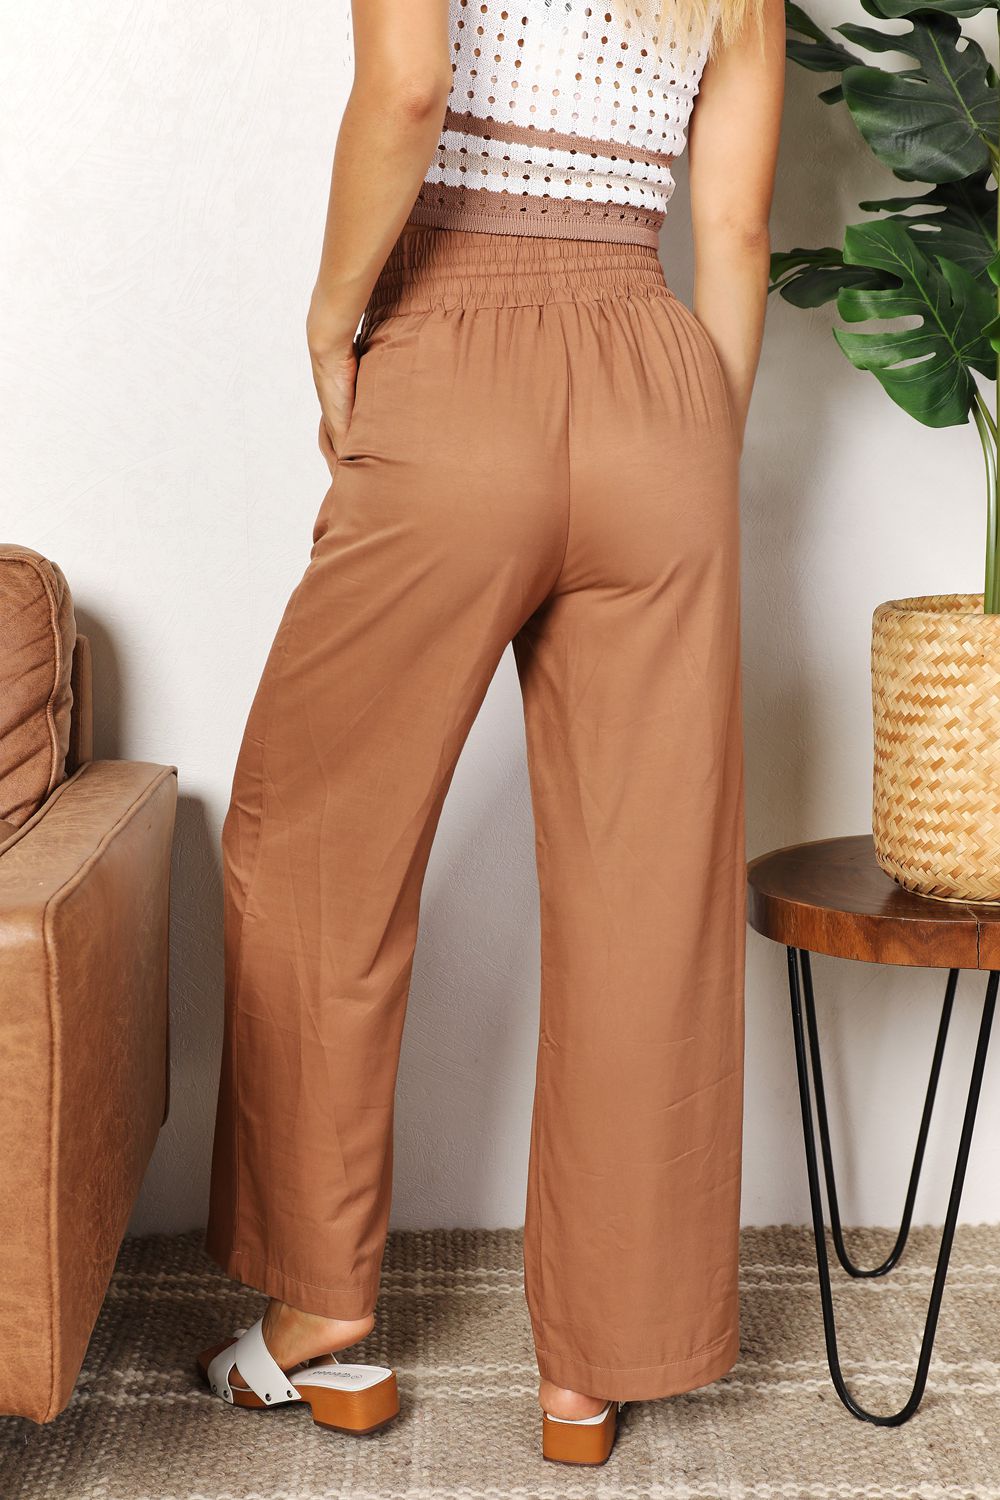 Double Take Drawstring Smocked Waist Wide Leg Pants - 2 Colors Available!